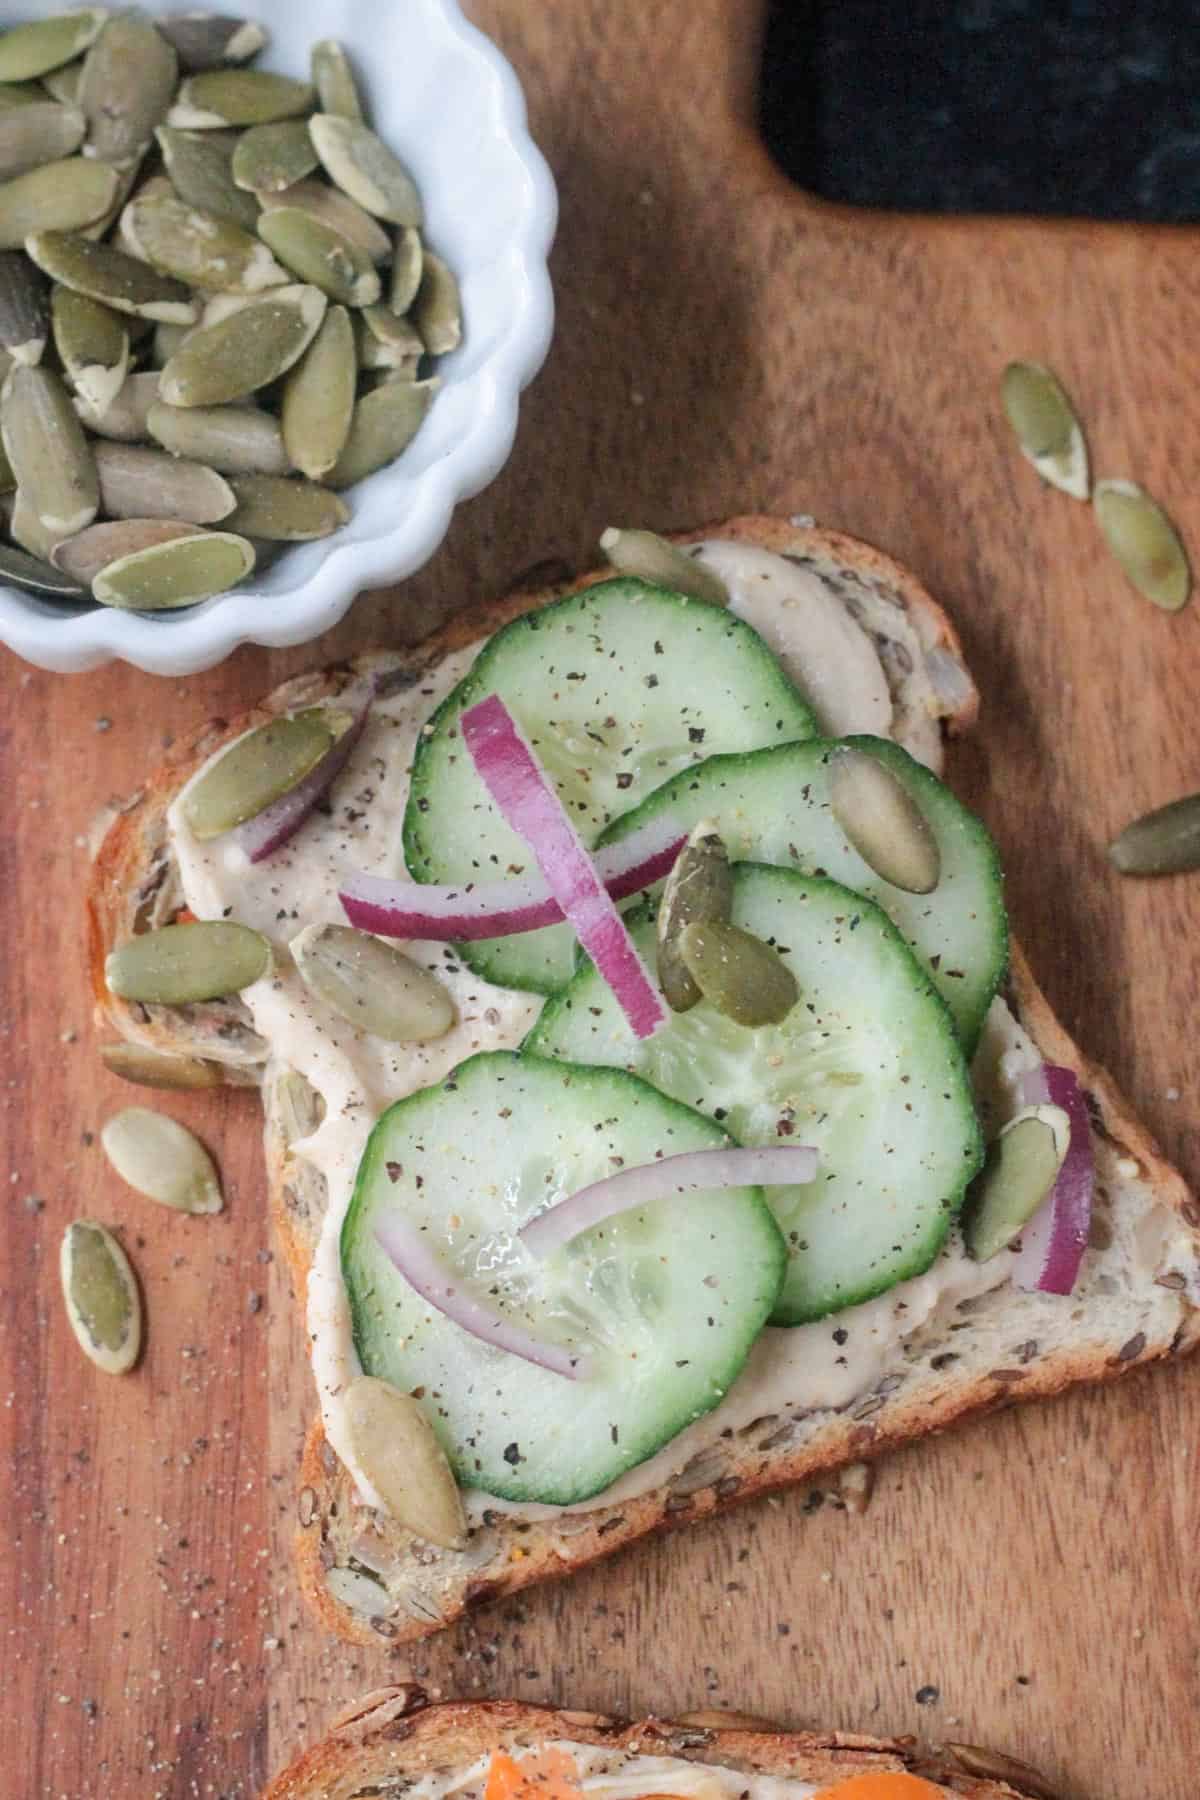 Piece of toast with hummus, cucumbers, red onions, and pumpkin seeds.